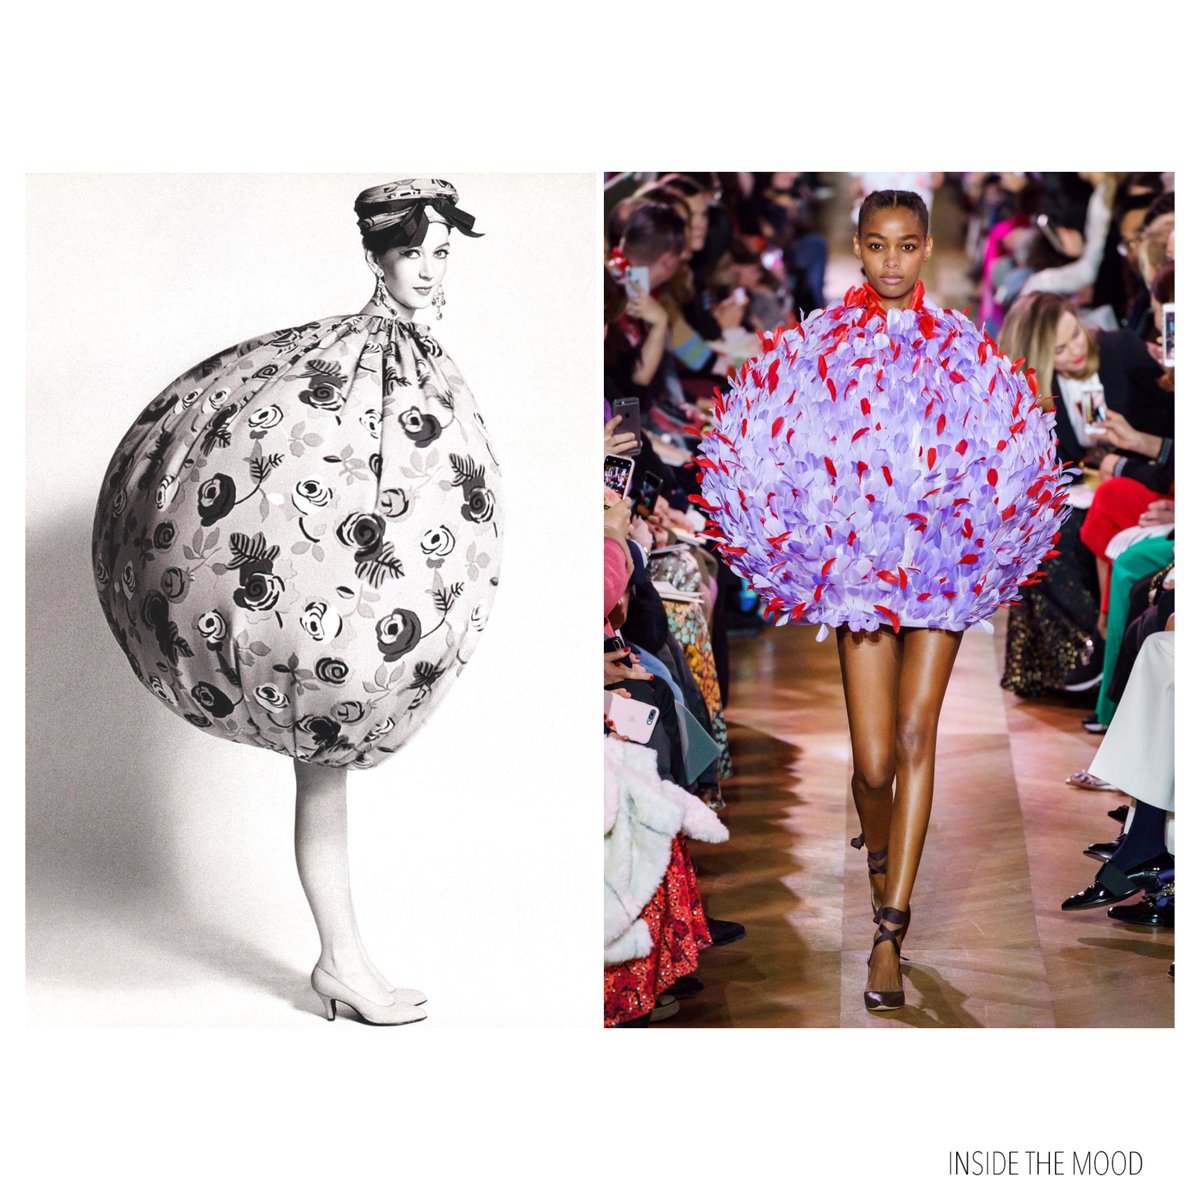 FROM FASHION: Dovima in a “Bubble dress” by  Traina-Norell and photographed by Richard Alvedon, 1957 || Schiaparelli, Spring 2019 Couture #dovima #bubbledress #trainanorell #richardavedon #schiaparelli #bertrandguyon #fashioninspiration #inspiration #insidethemood #couture